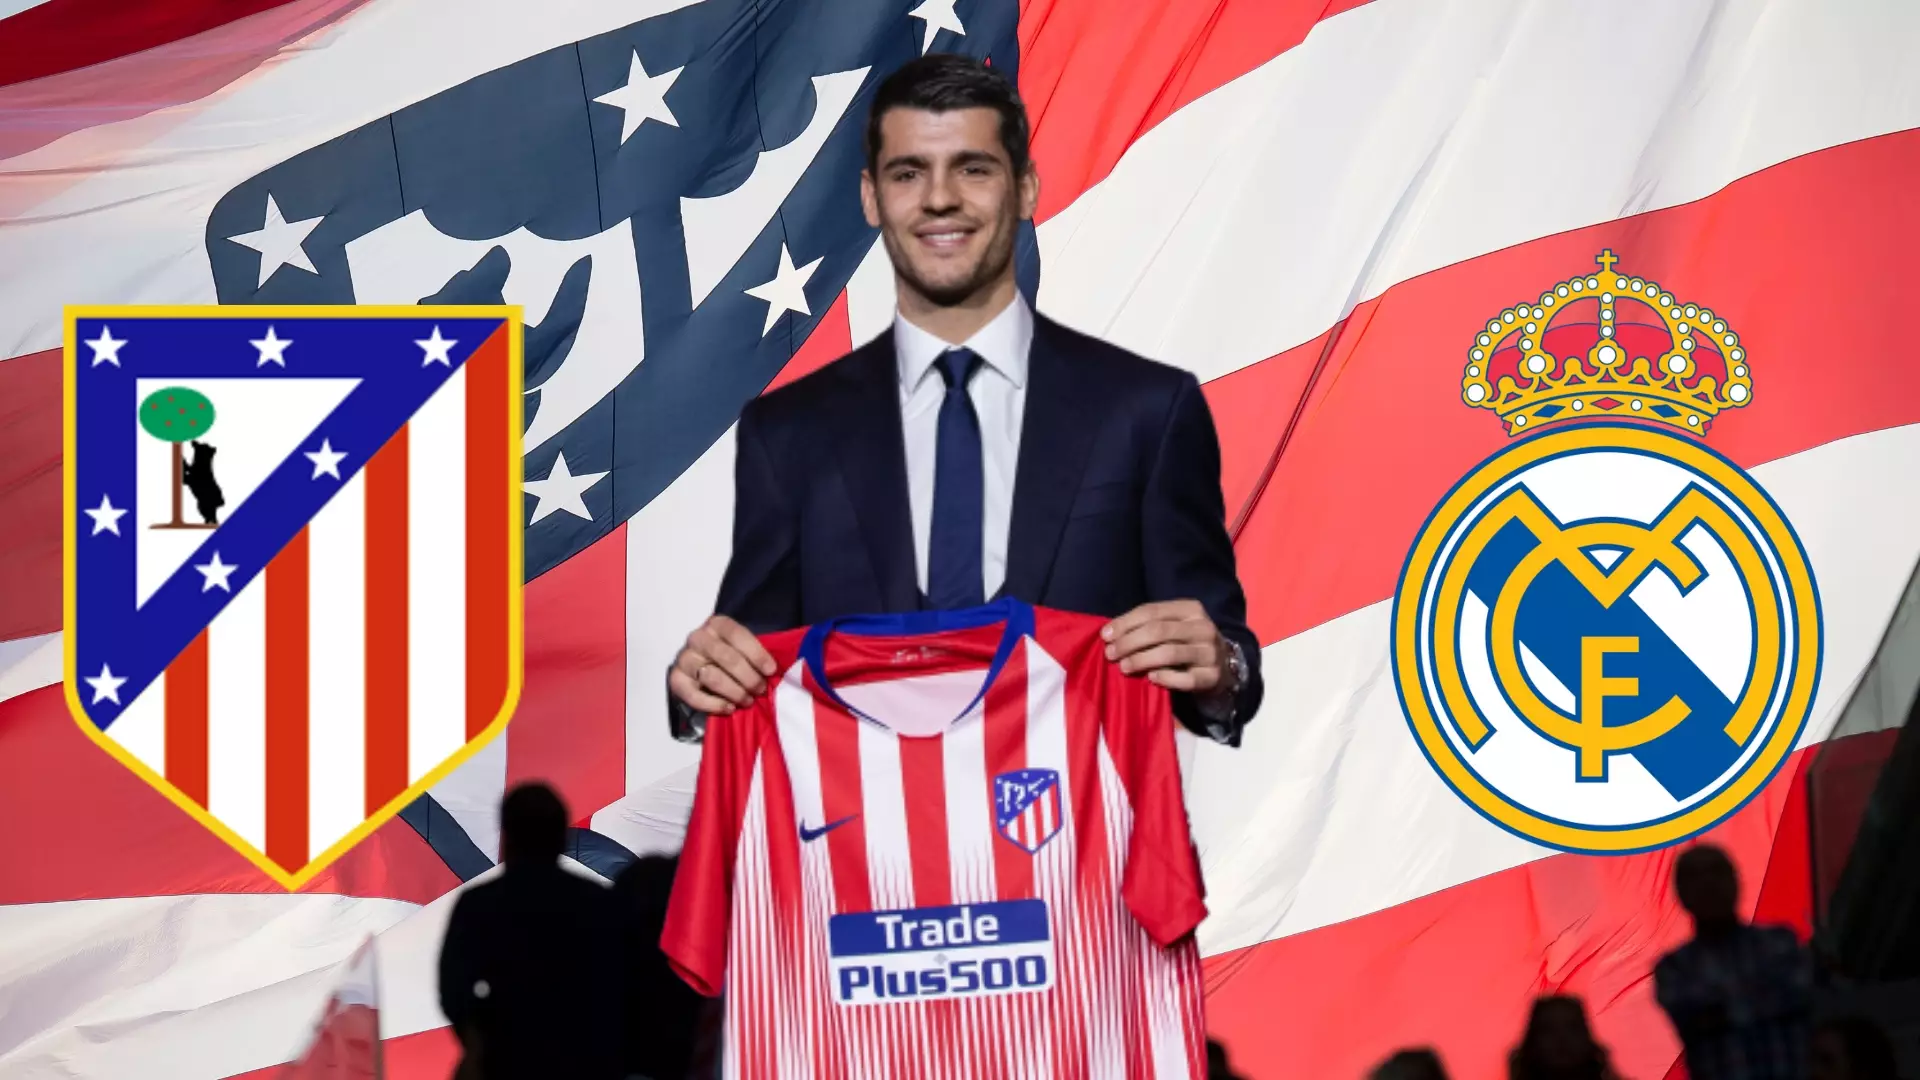 Real Madrid Fans Won't Be Happy With Morata’s Comments After Signing For Atlético Madrid